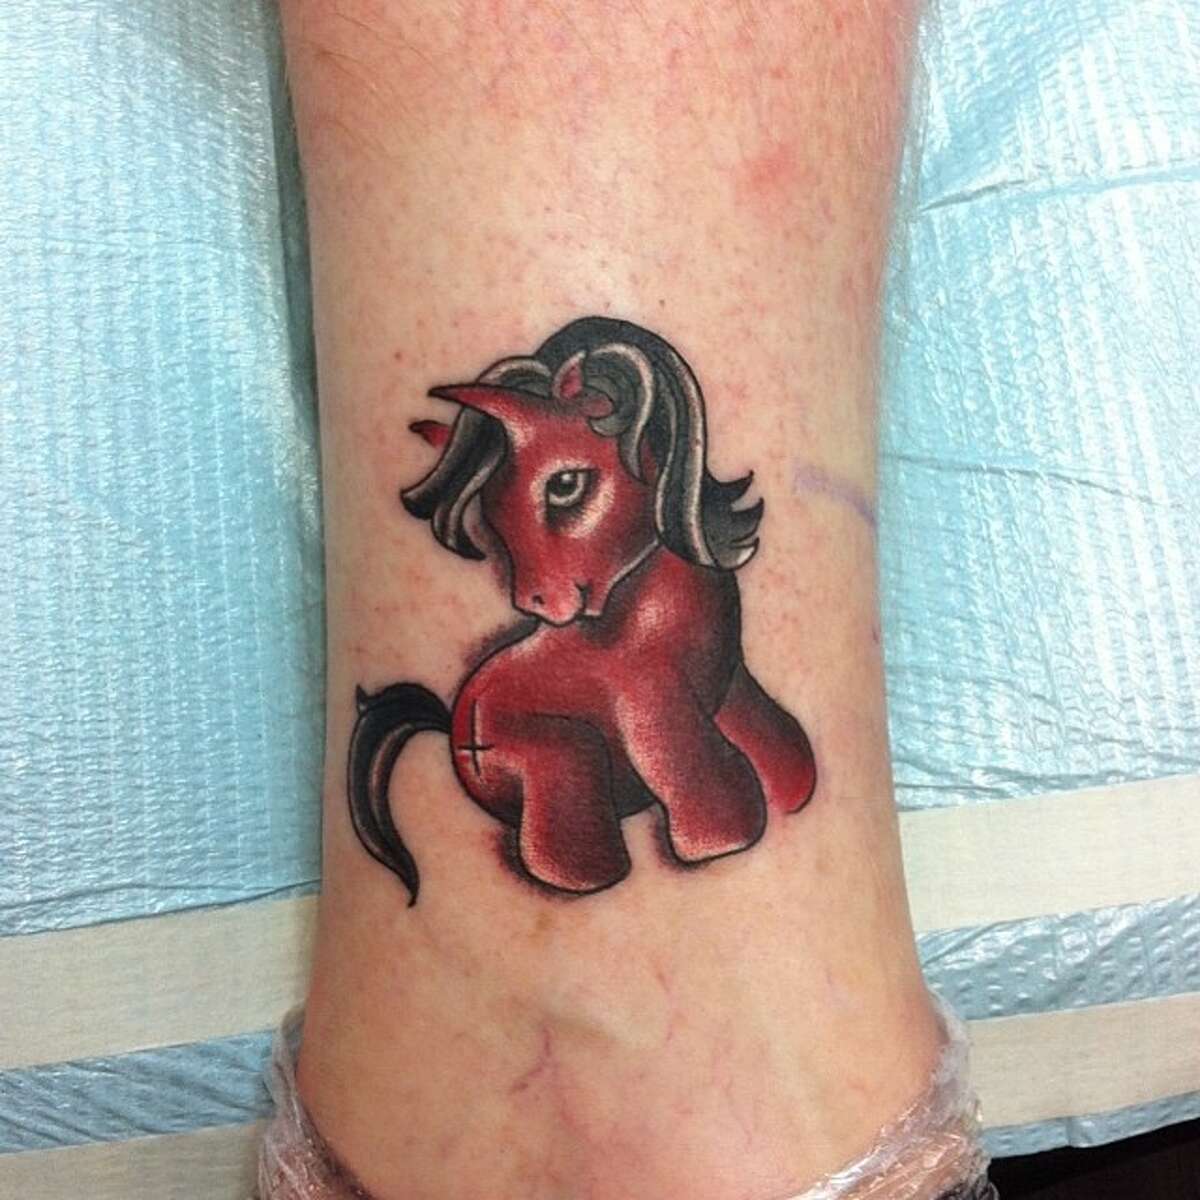 Kerste Diston on Twitter MyLittlePony mlp tattoo from today  Absolutely loved doing this one httpstco4J2ND4lRdD  Twitter